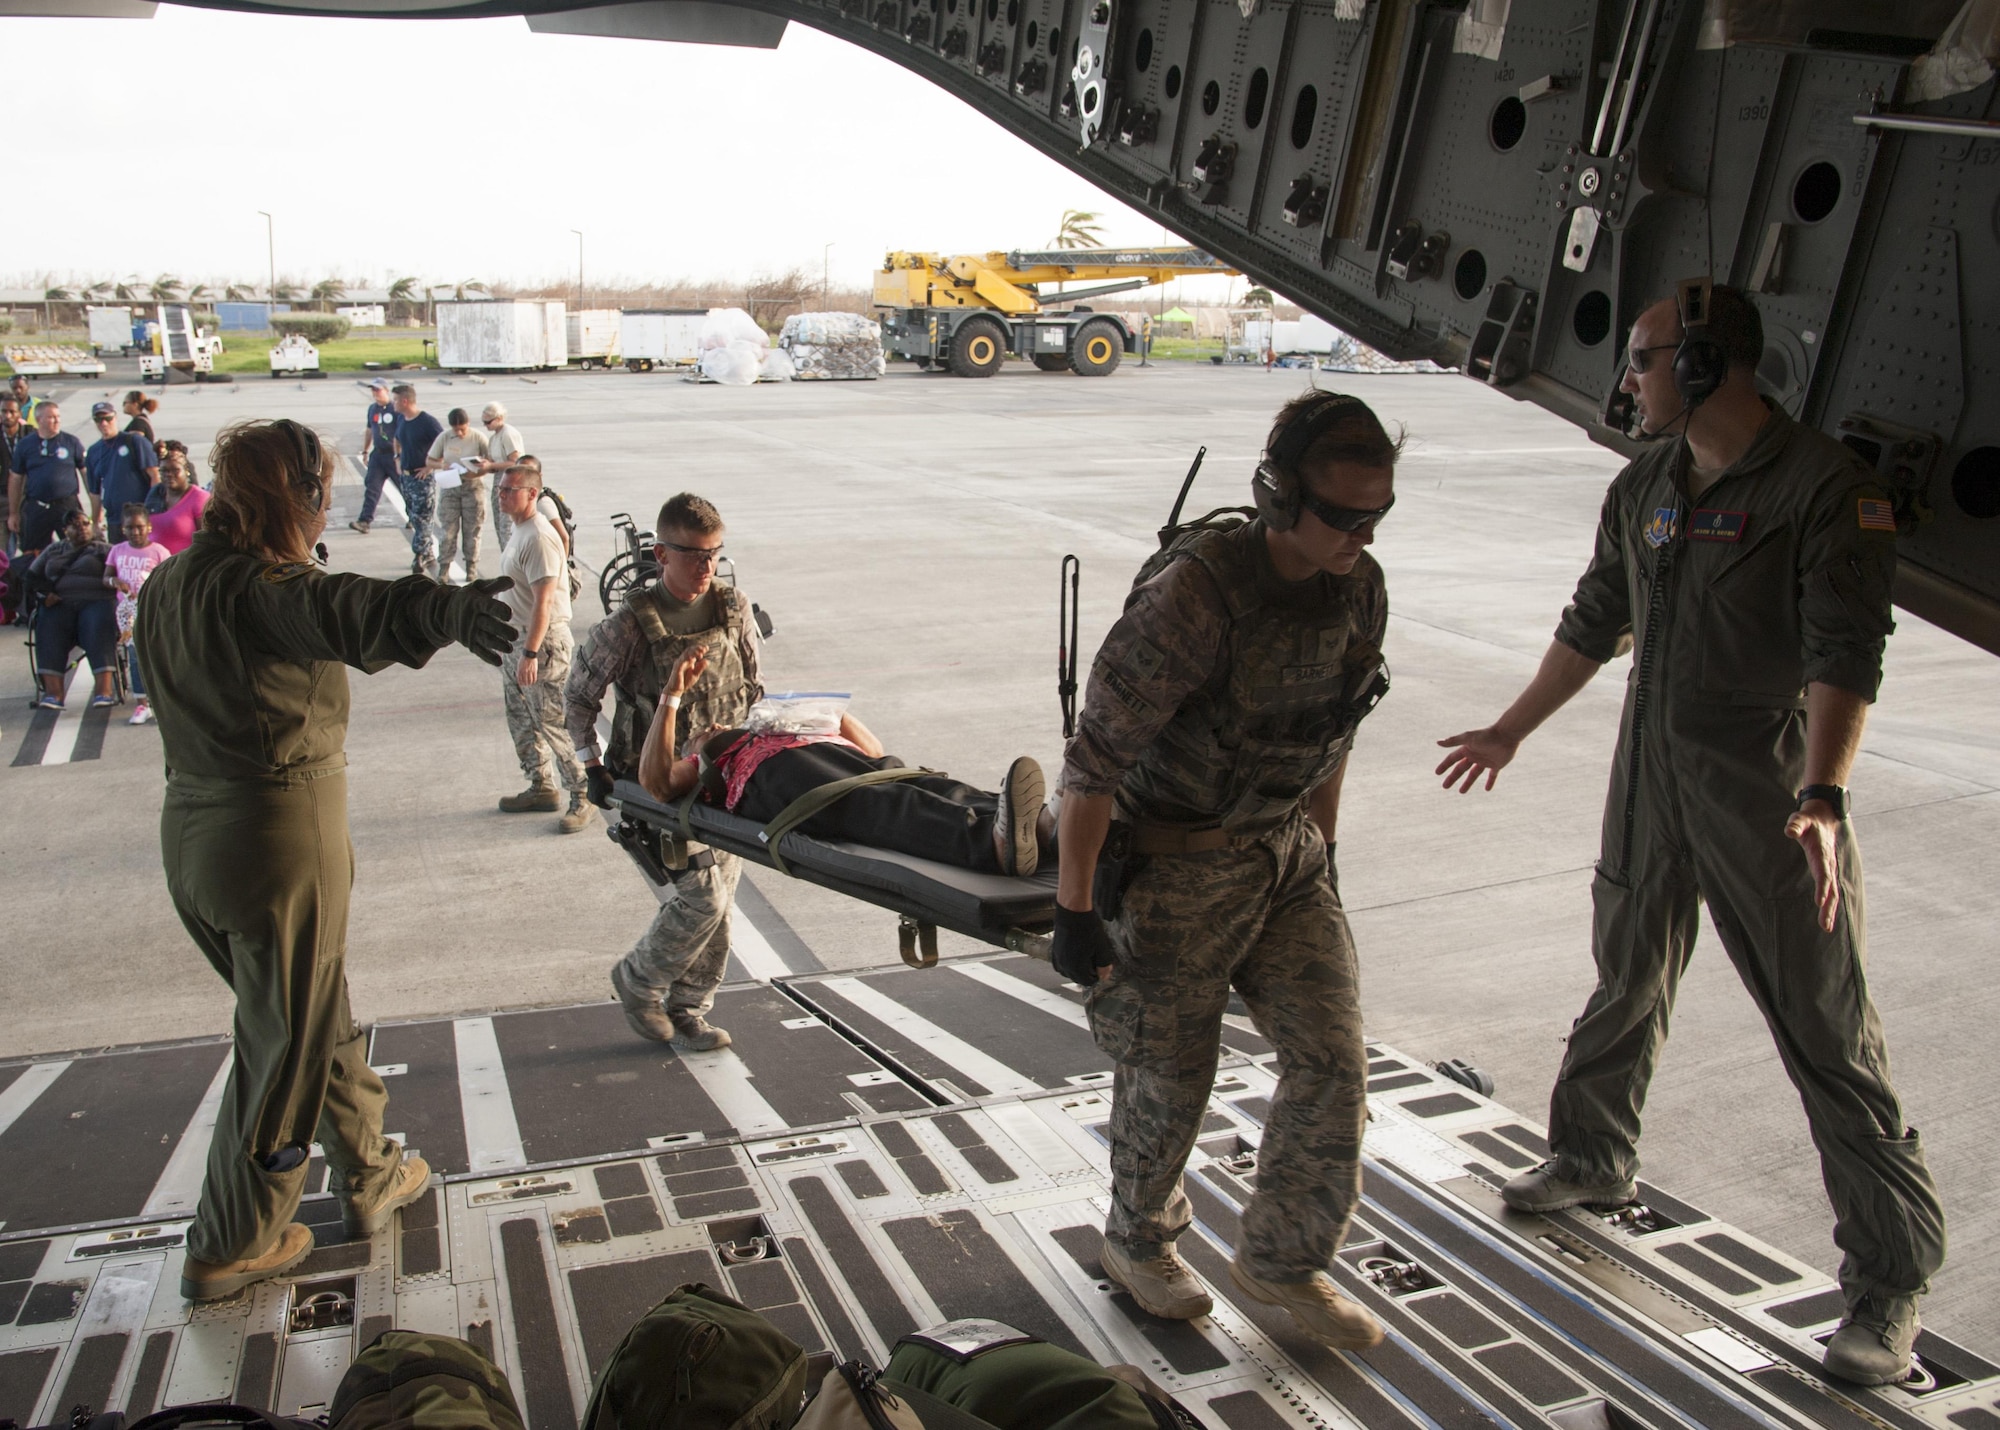 Reserve Citizen Airmen assigned to the 45th Aeromedical Evacuation Squadron, carry patients aboard a C-17 Globemaster III in St. Croix, U.S. Virgin Islands, Sept. 24, 2017. Reserve Citizen Airmen conduct humanitarian mission to St. Croix to evacuate victims affected by Hurricane Maria. (U.S. Air Force photo by Tech. Sgt. Peter Dean)